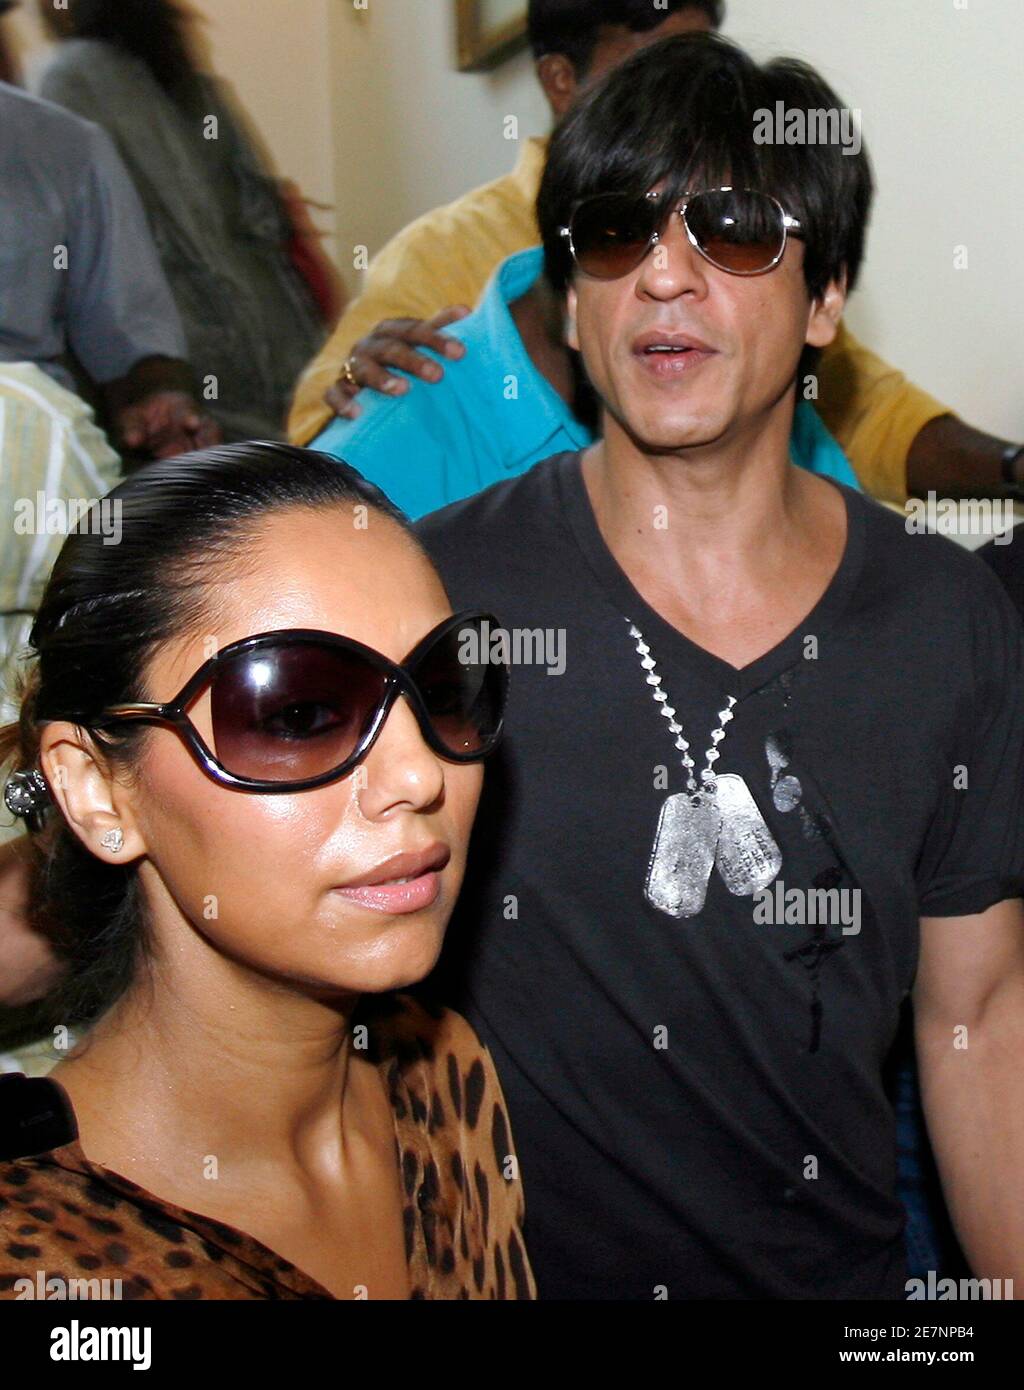 Bollywood actor Shah Rukh Khan (R) arrives with his wife Gauri at the Indian Premier League's (IPL) player auction in Mumbai February 20, 2008. The tycoons behind India's new Twenty20 cricket tournament gathered in a Mumbai hotel conference room on Wednesday ready to hammer their cheque-books to sign some of the biggest names in sport. REUTERS/Punit Paranjpe (INDIA) Stock Photo